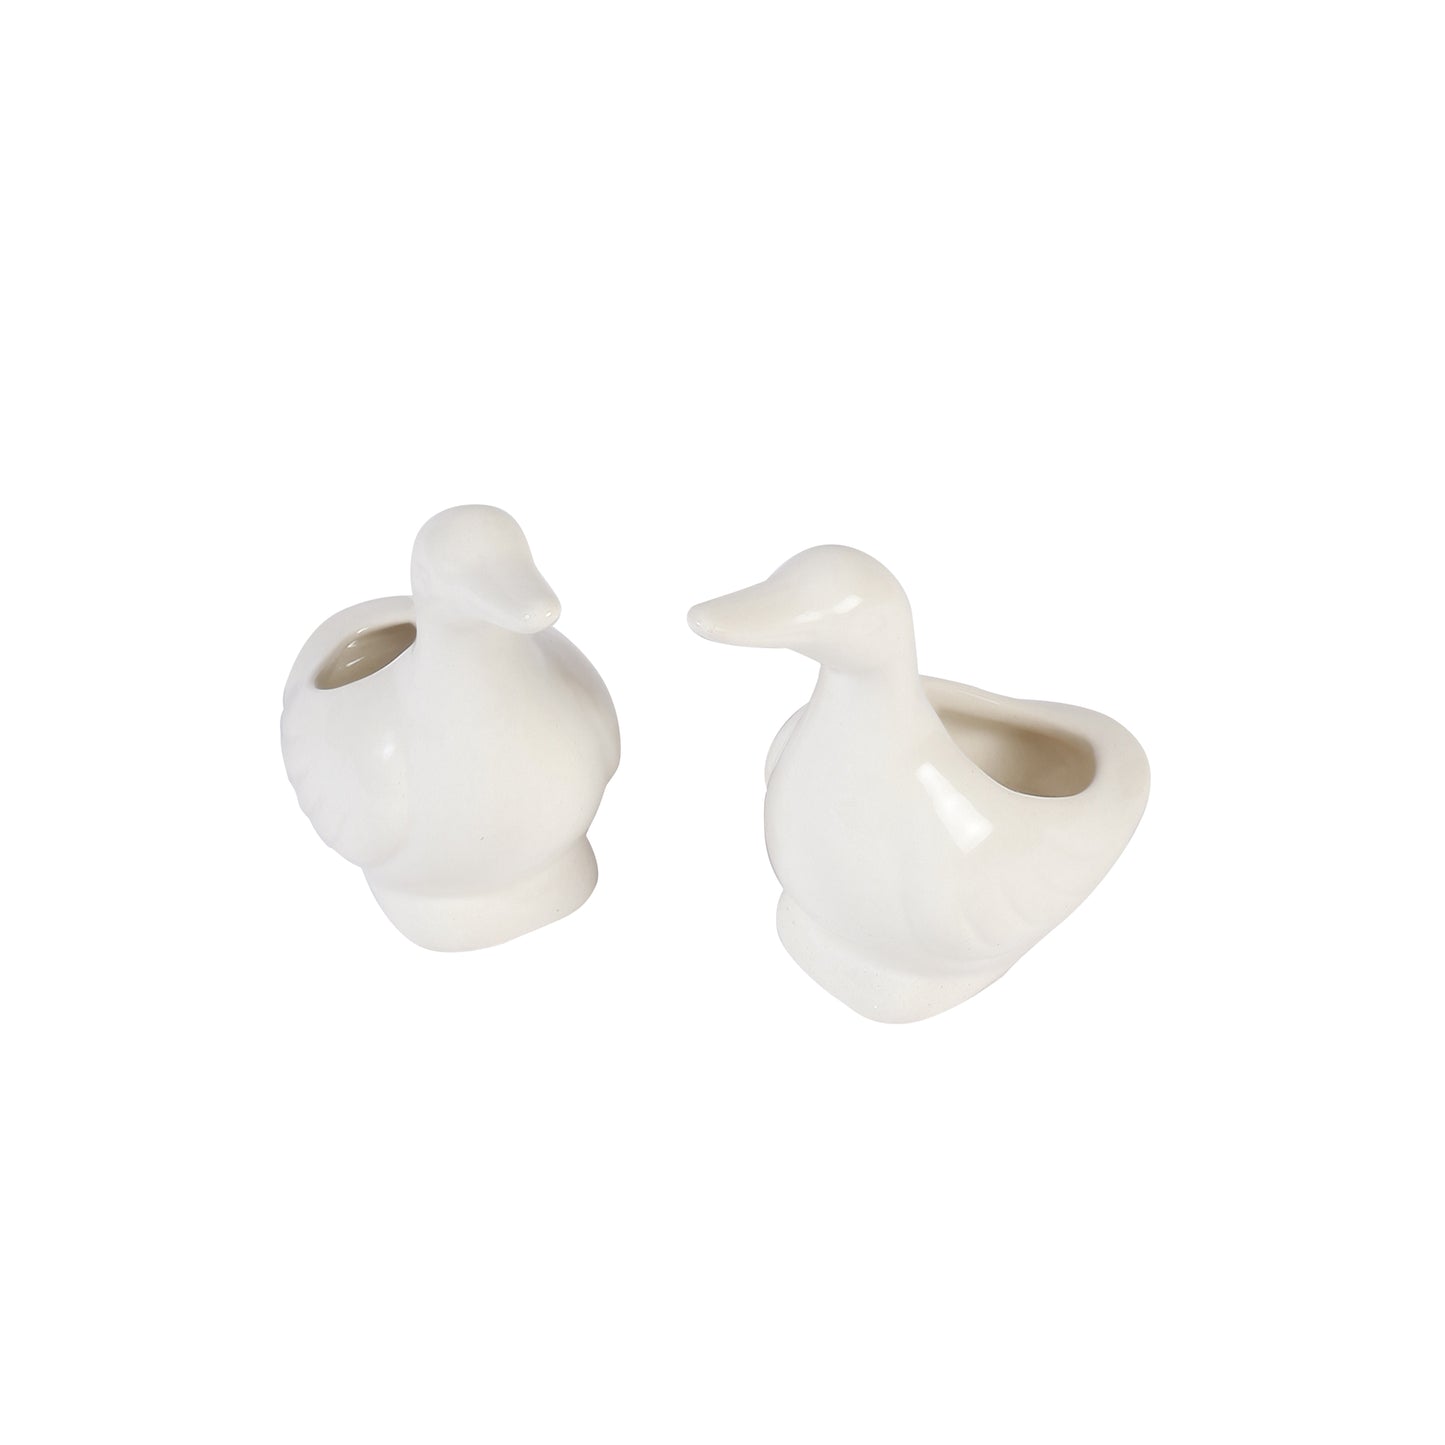 A Tiny Mistake Small Swan Ceramic Planter (Set of Two)